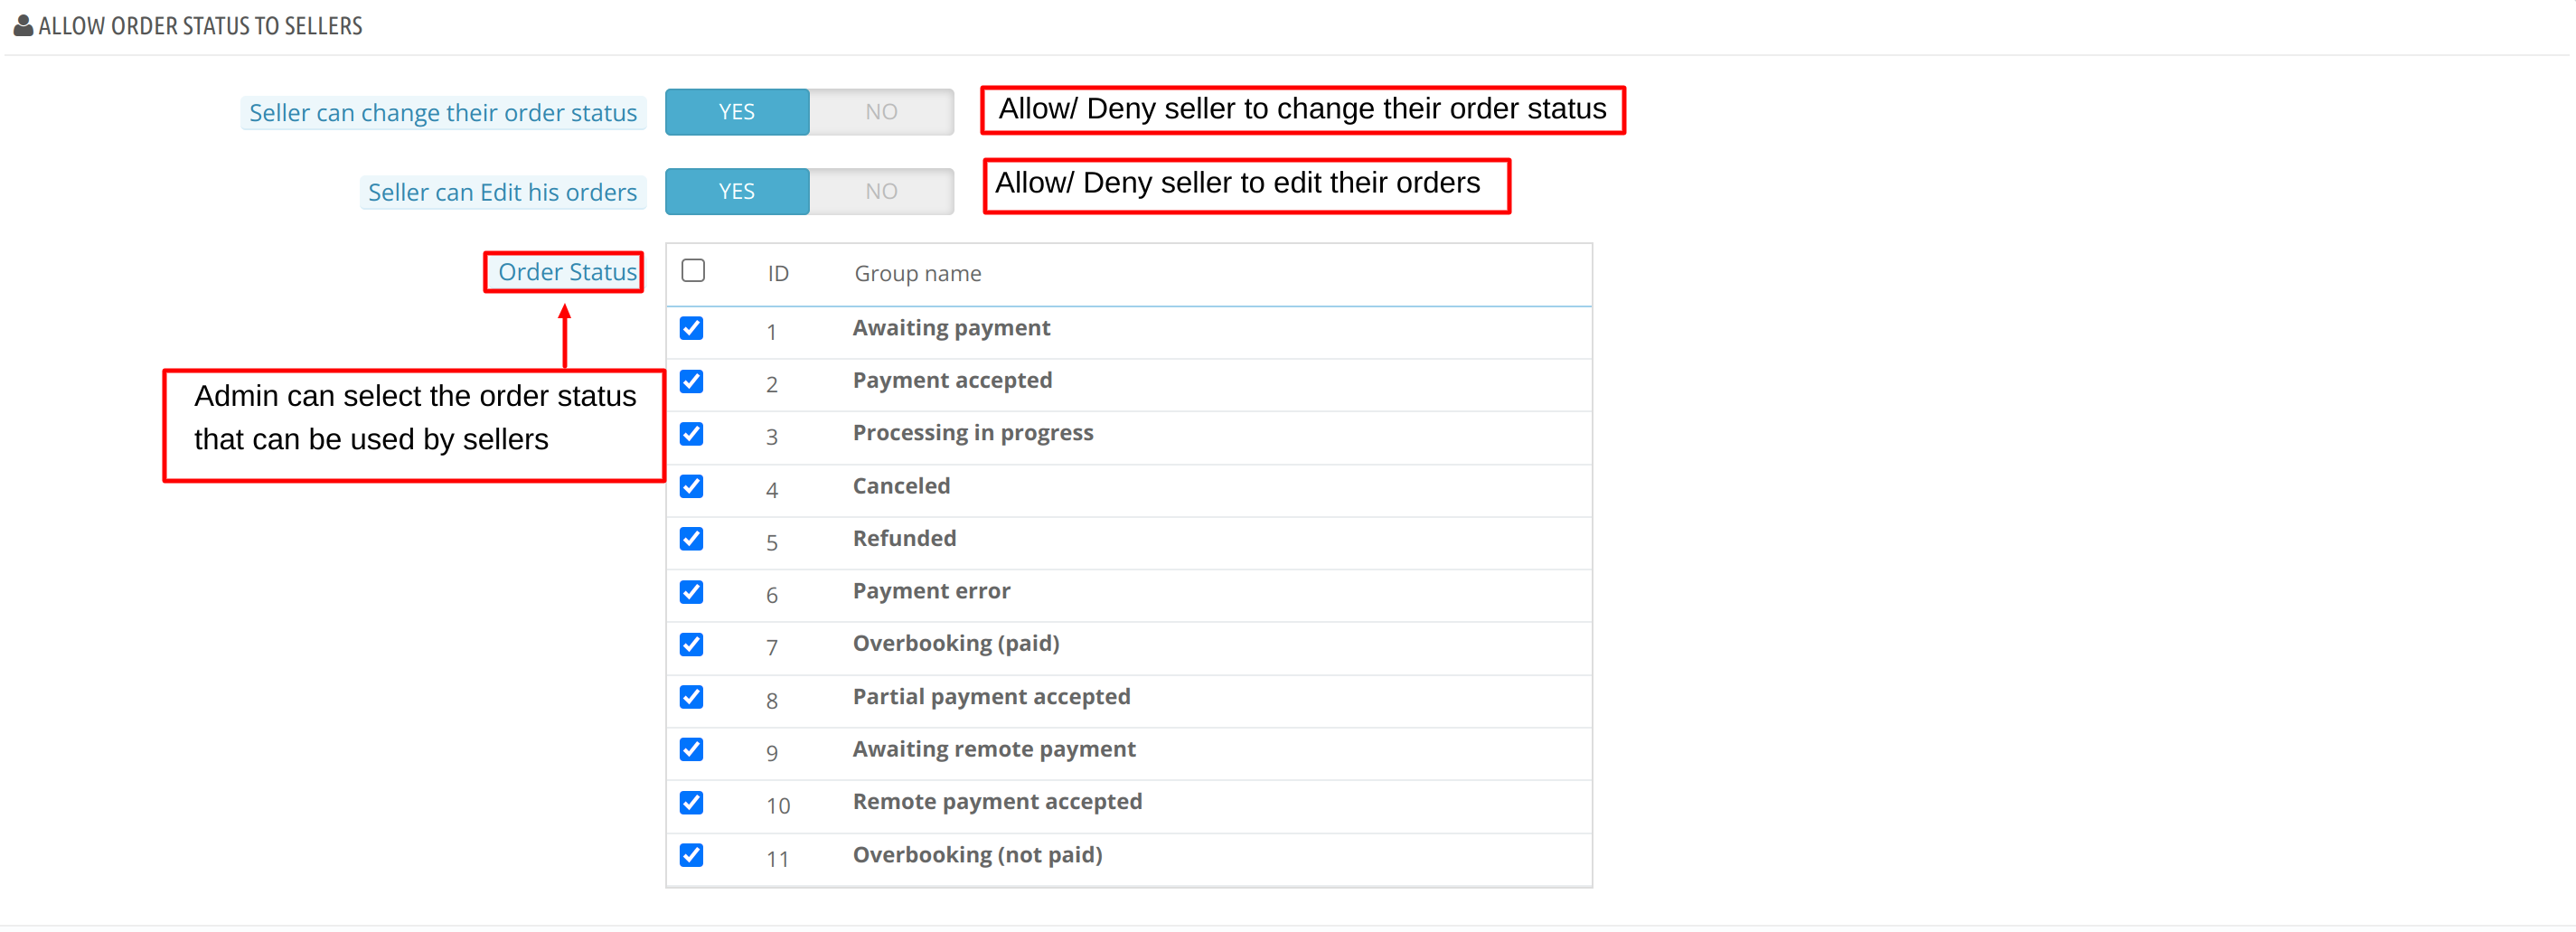 Order Status permission for Sellers